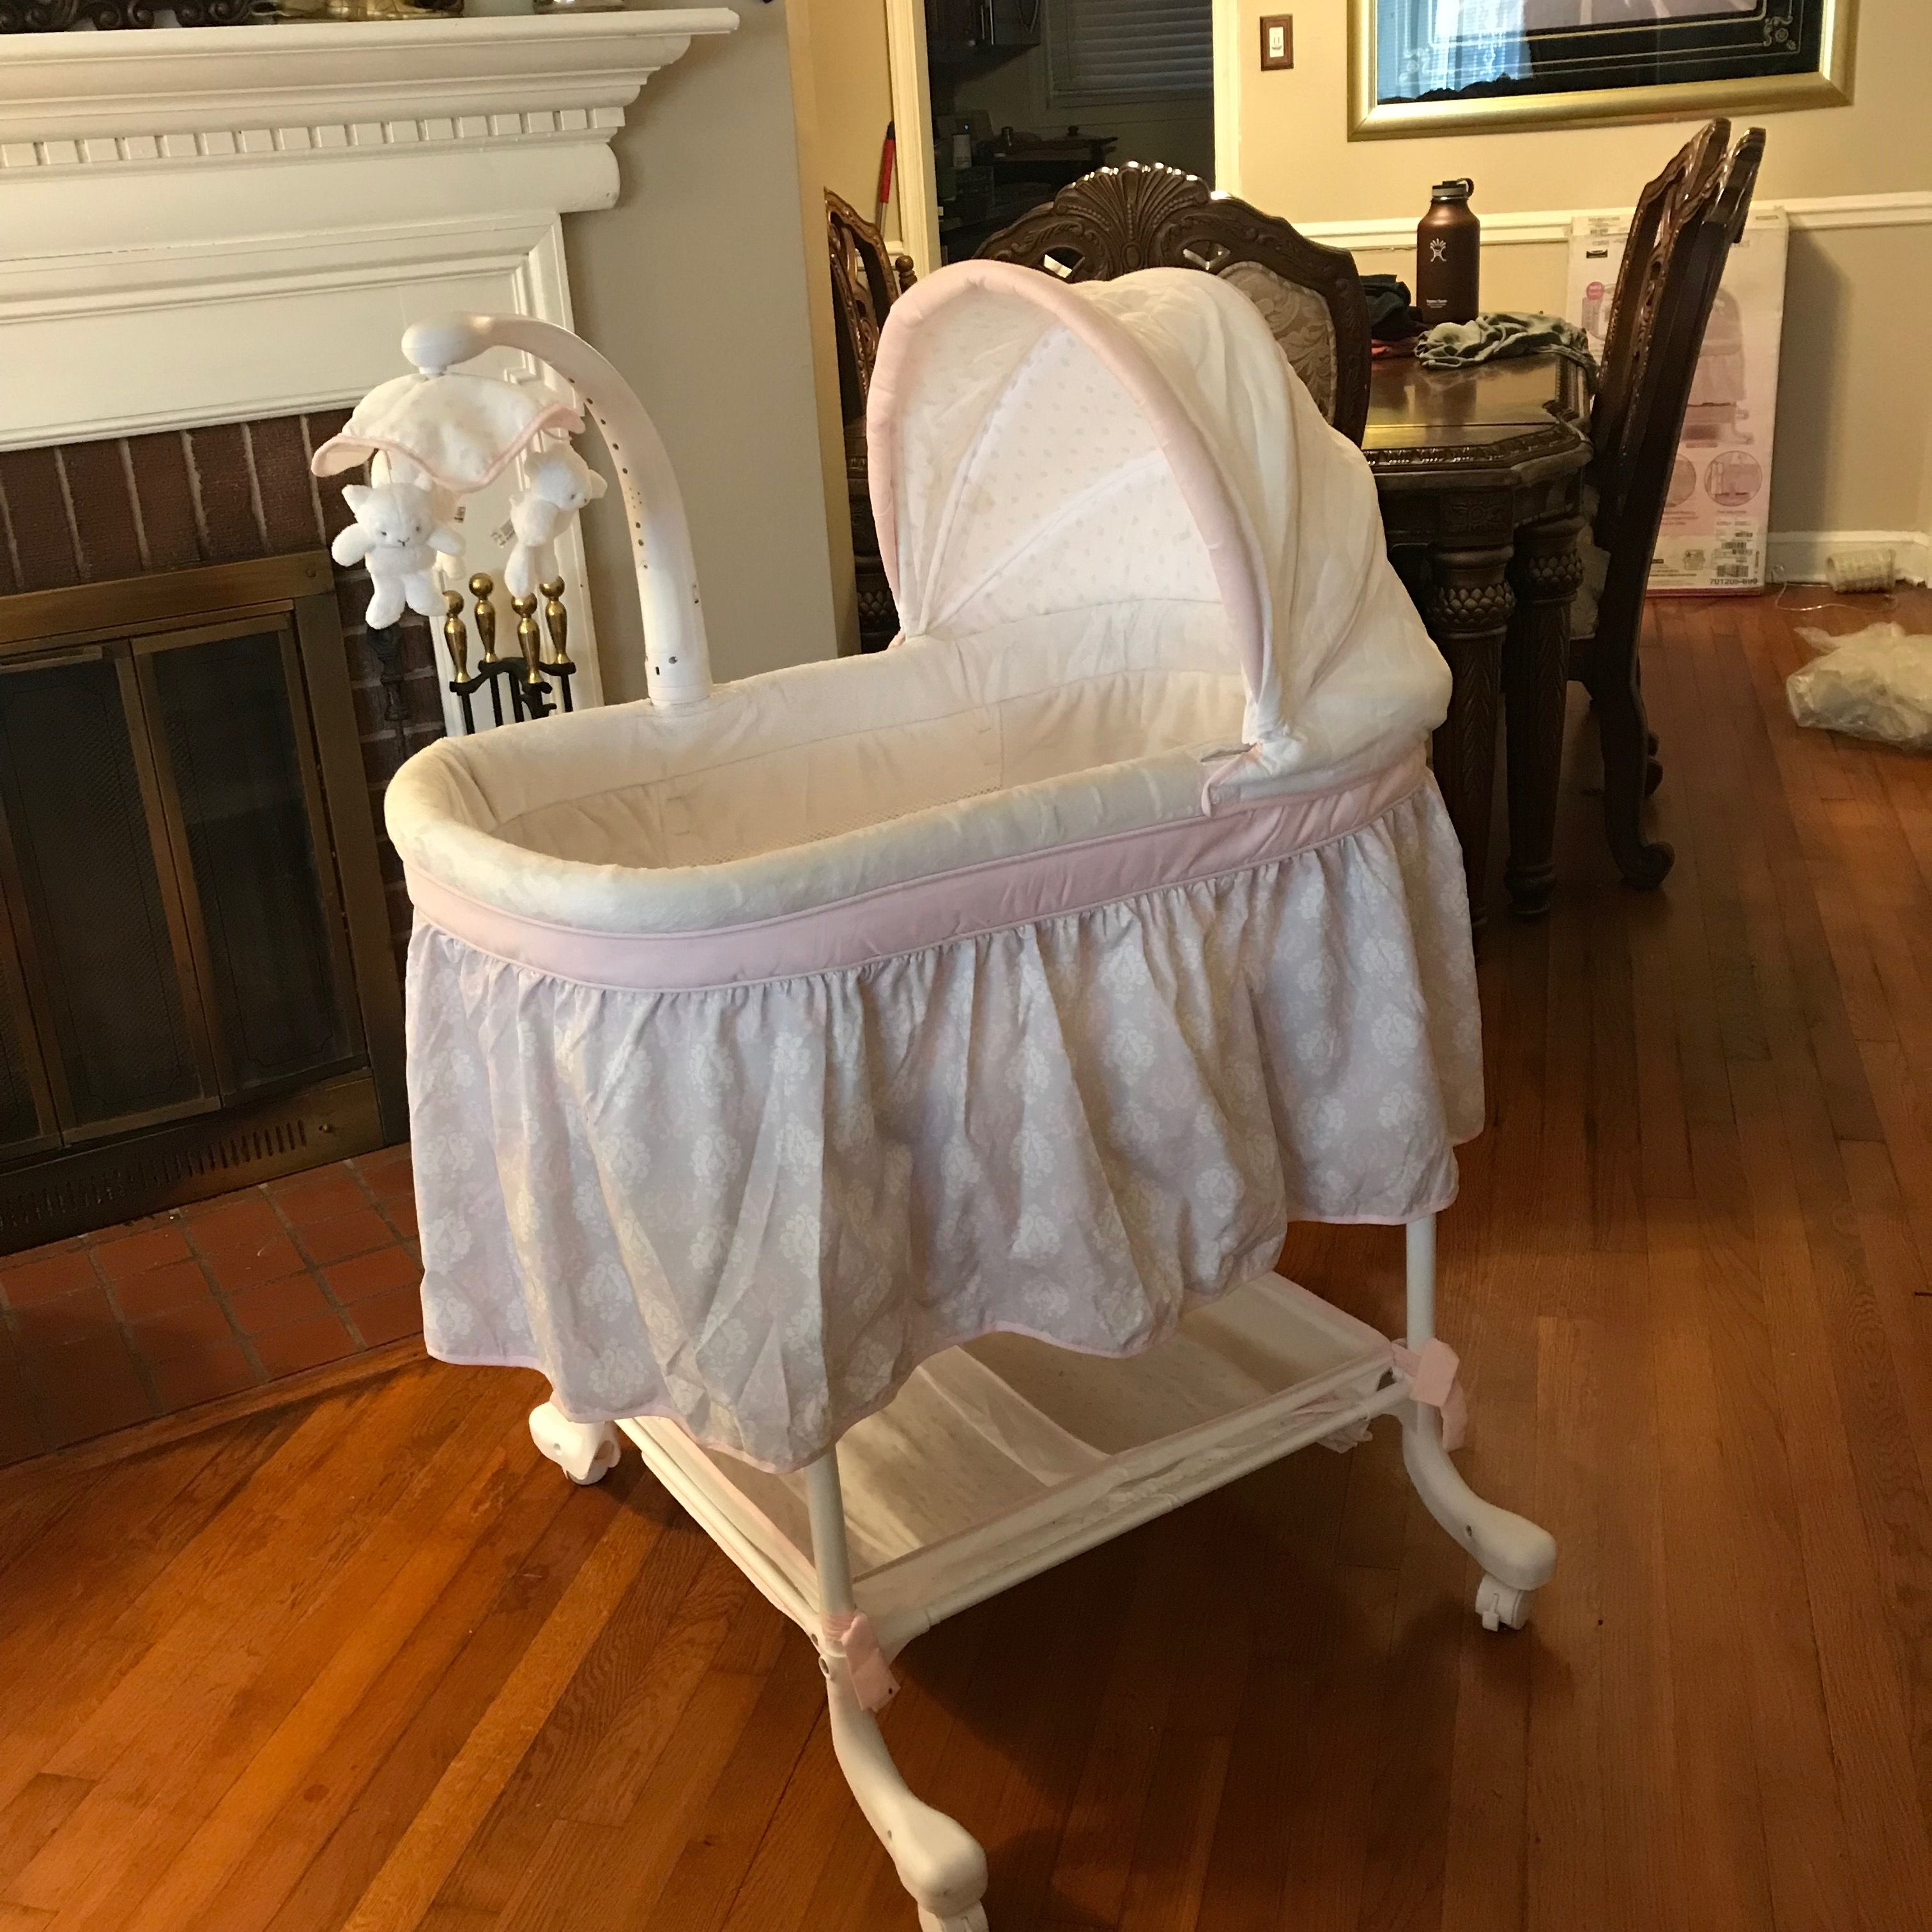 Simmons Kids Lucia Deluxe Gliding Bassinet